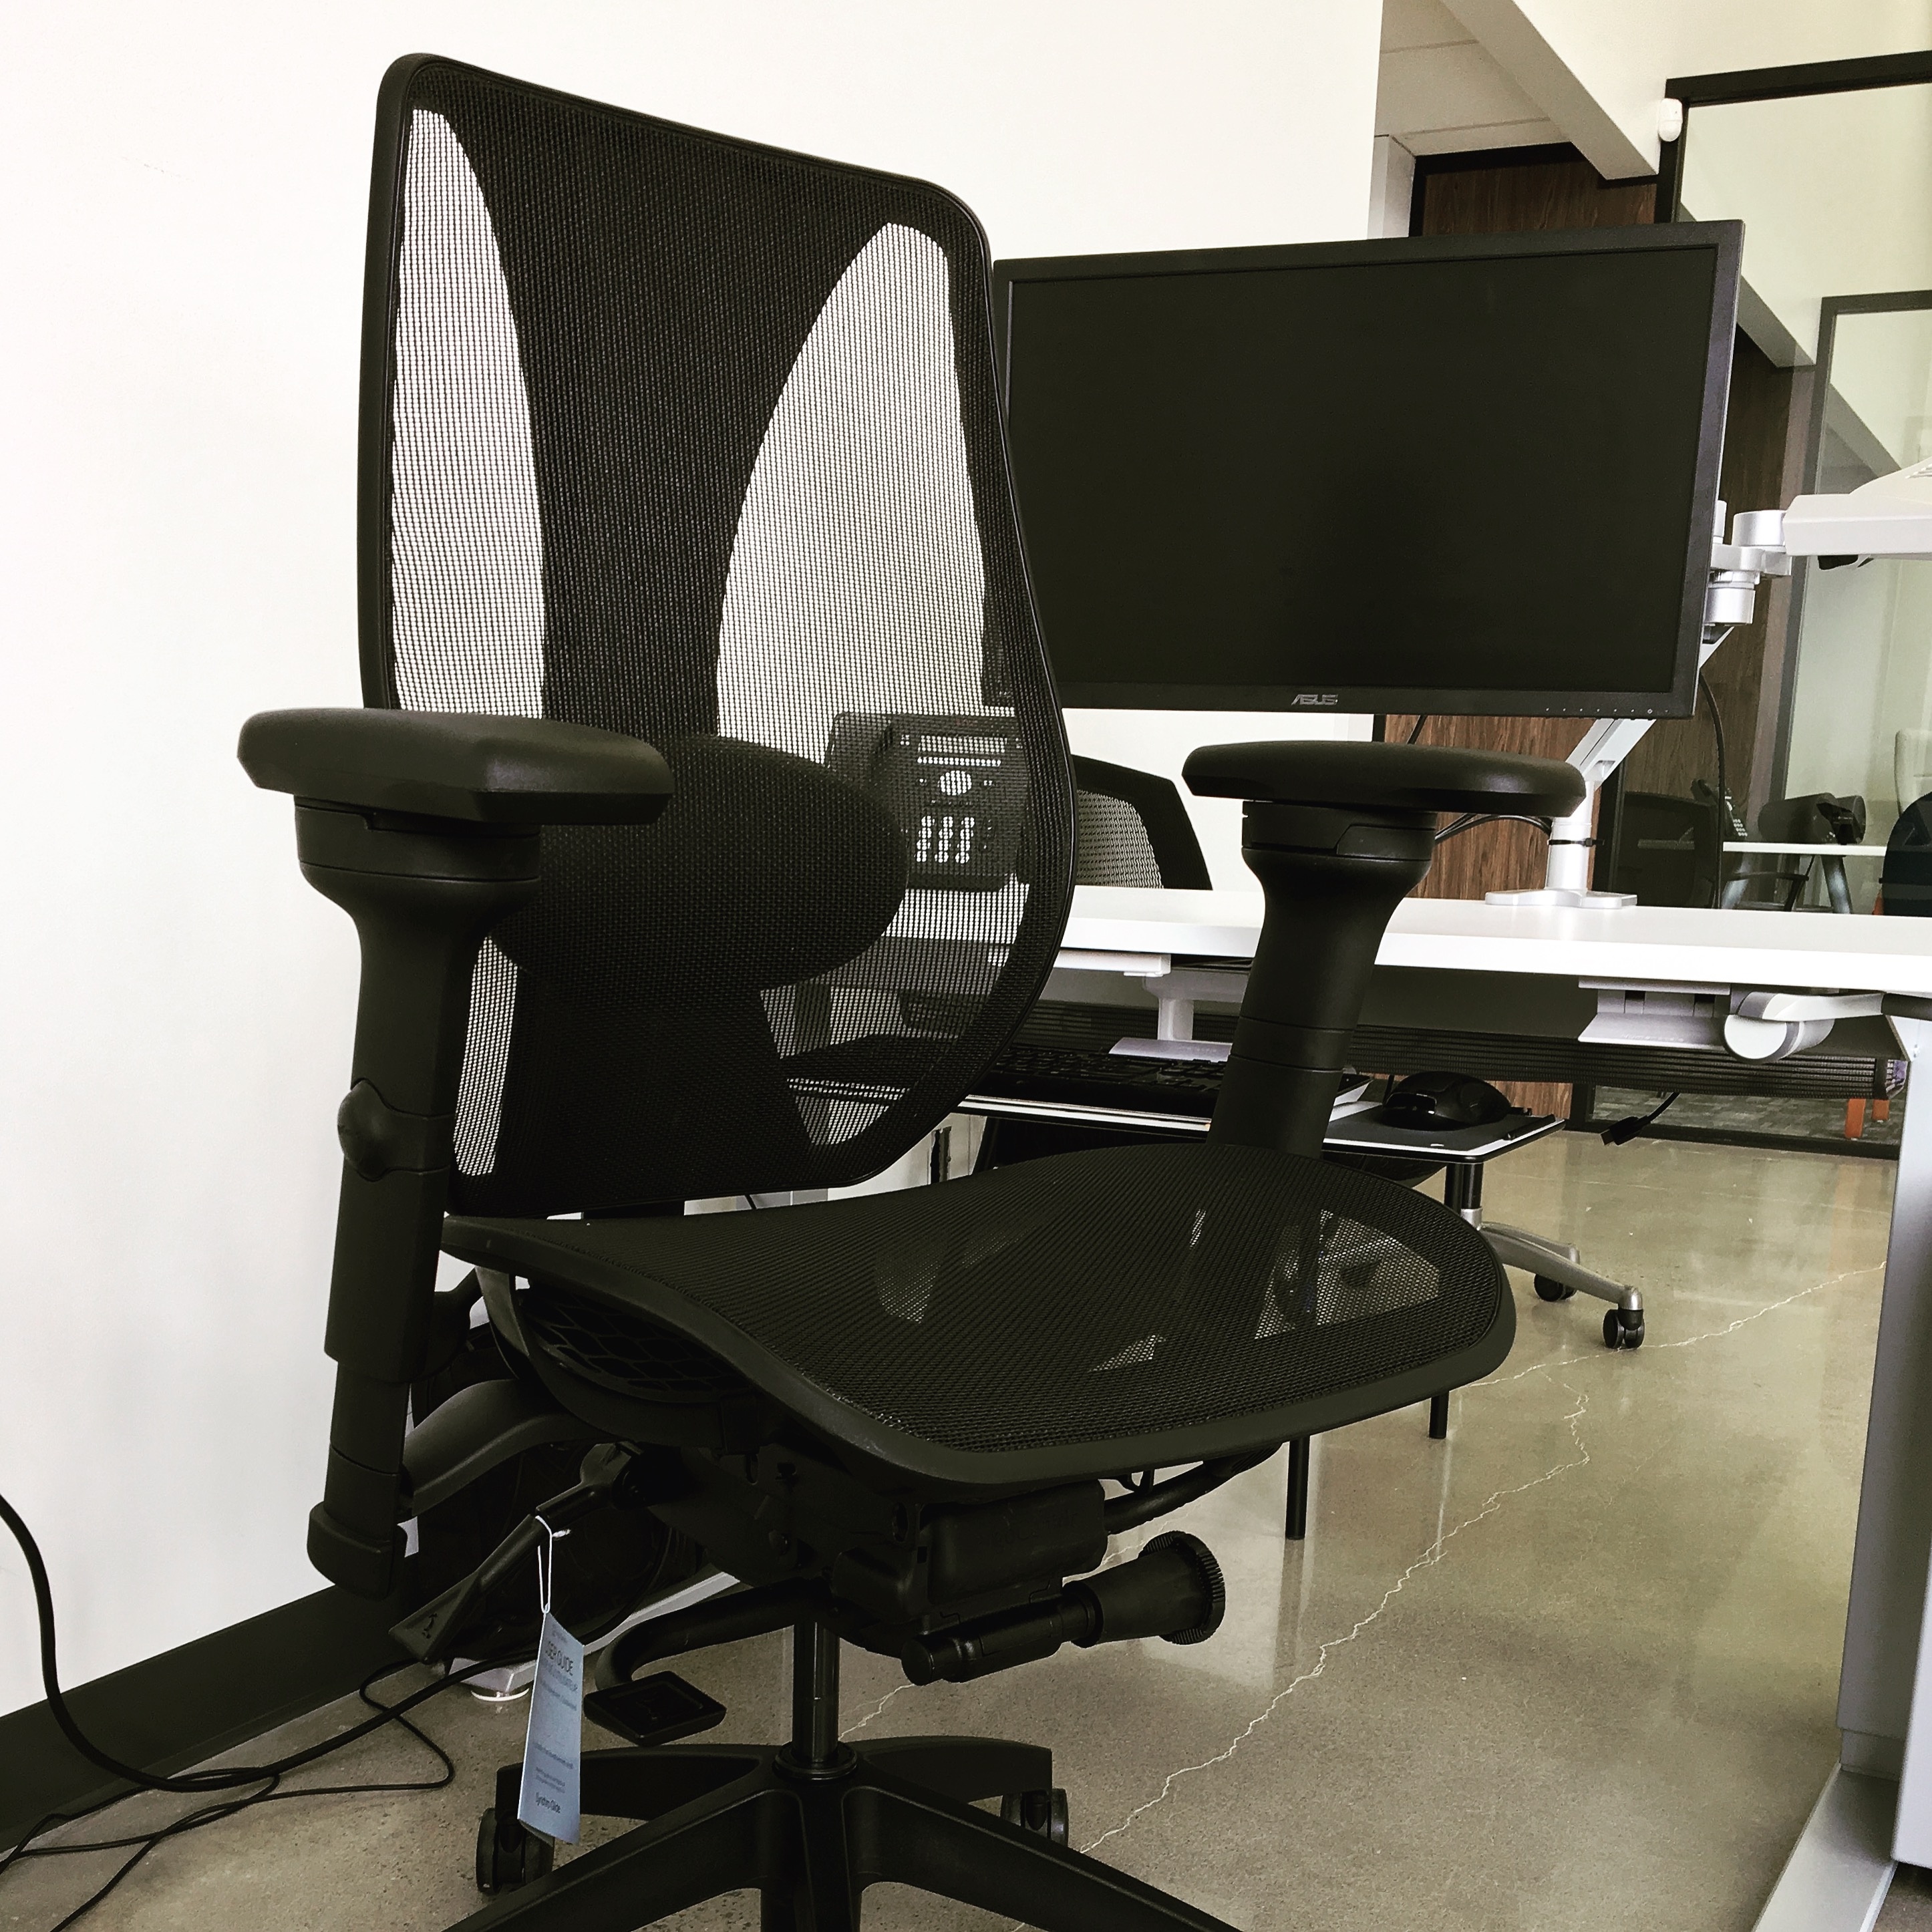 The Best Office Chair: Wirecutter Reviews | A New York Times Company